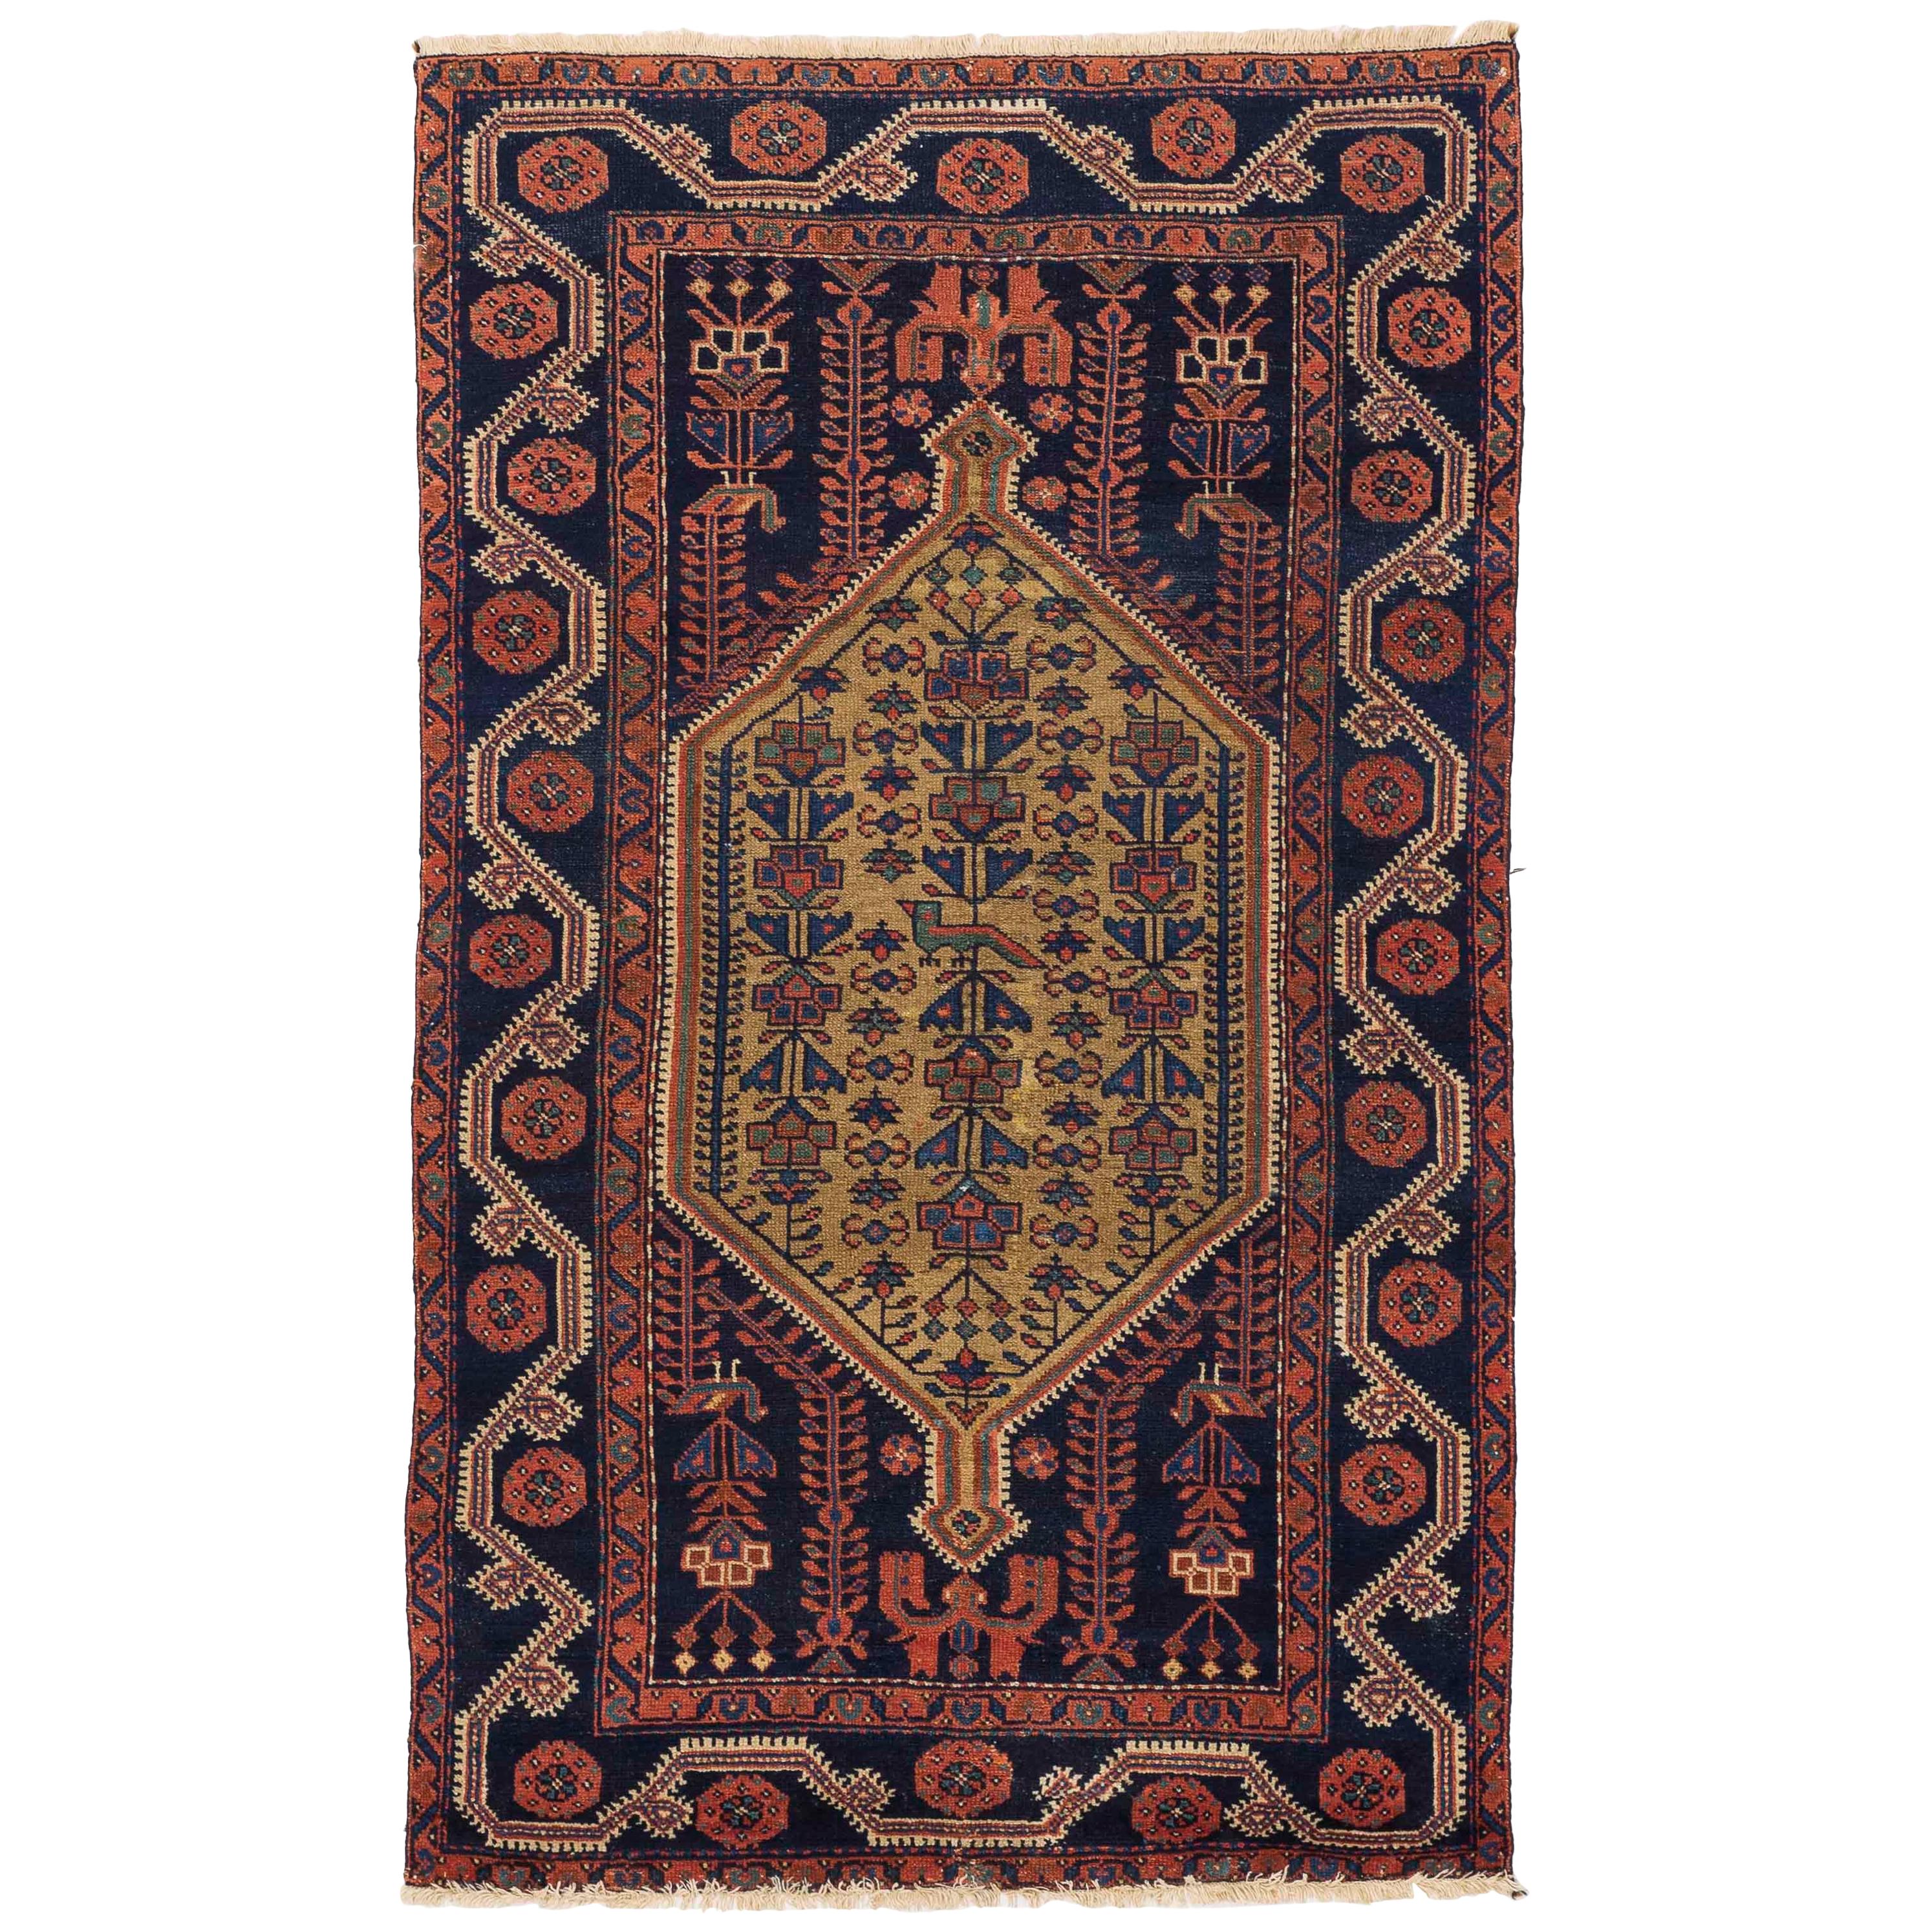 Antique Persian Hamedan Rug with Blue and Red Floral Patterns on Black Field For Sale